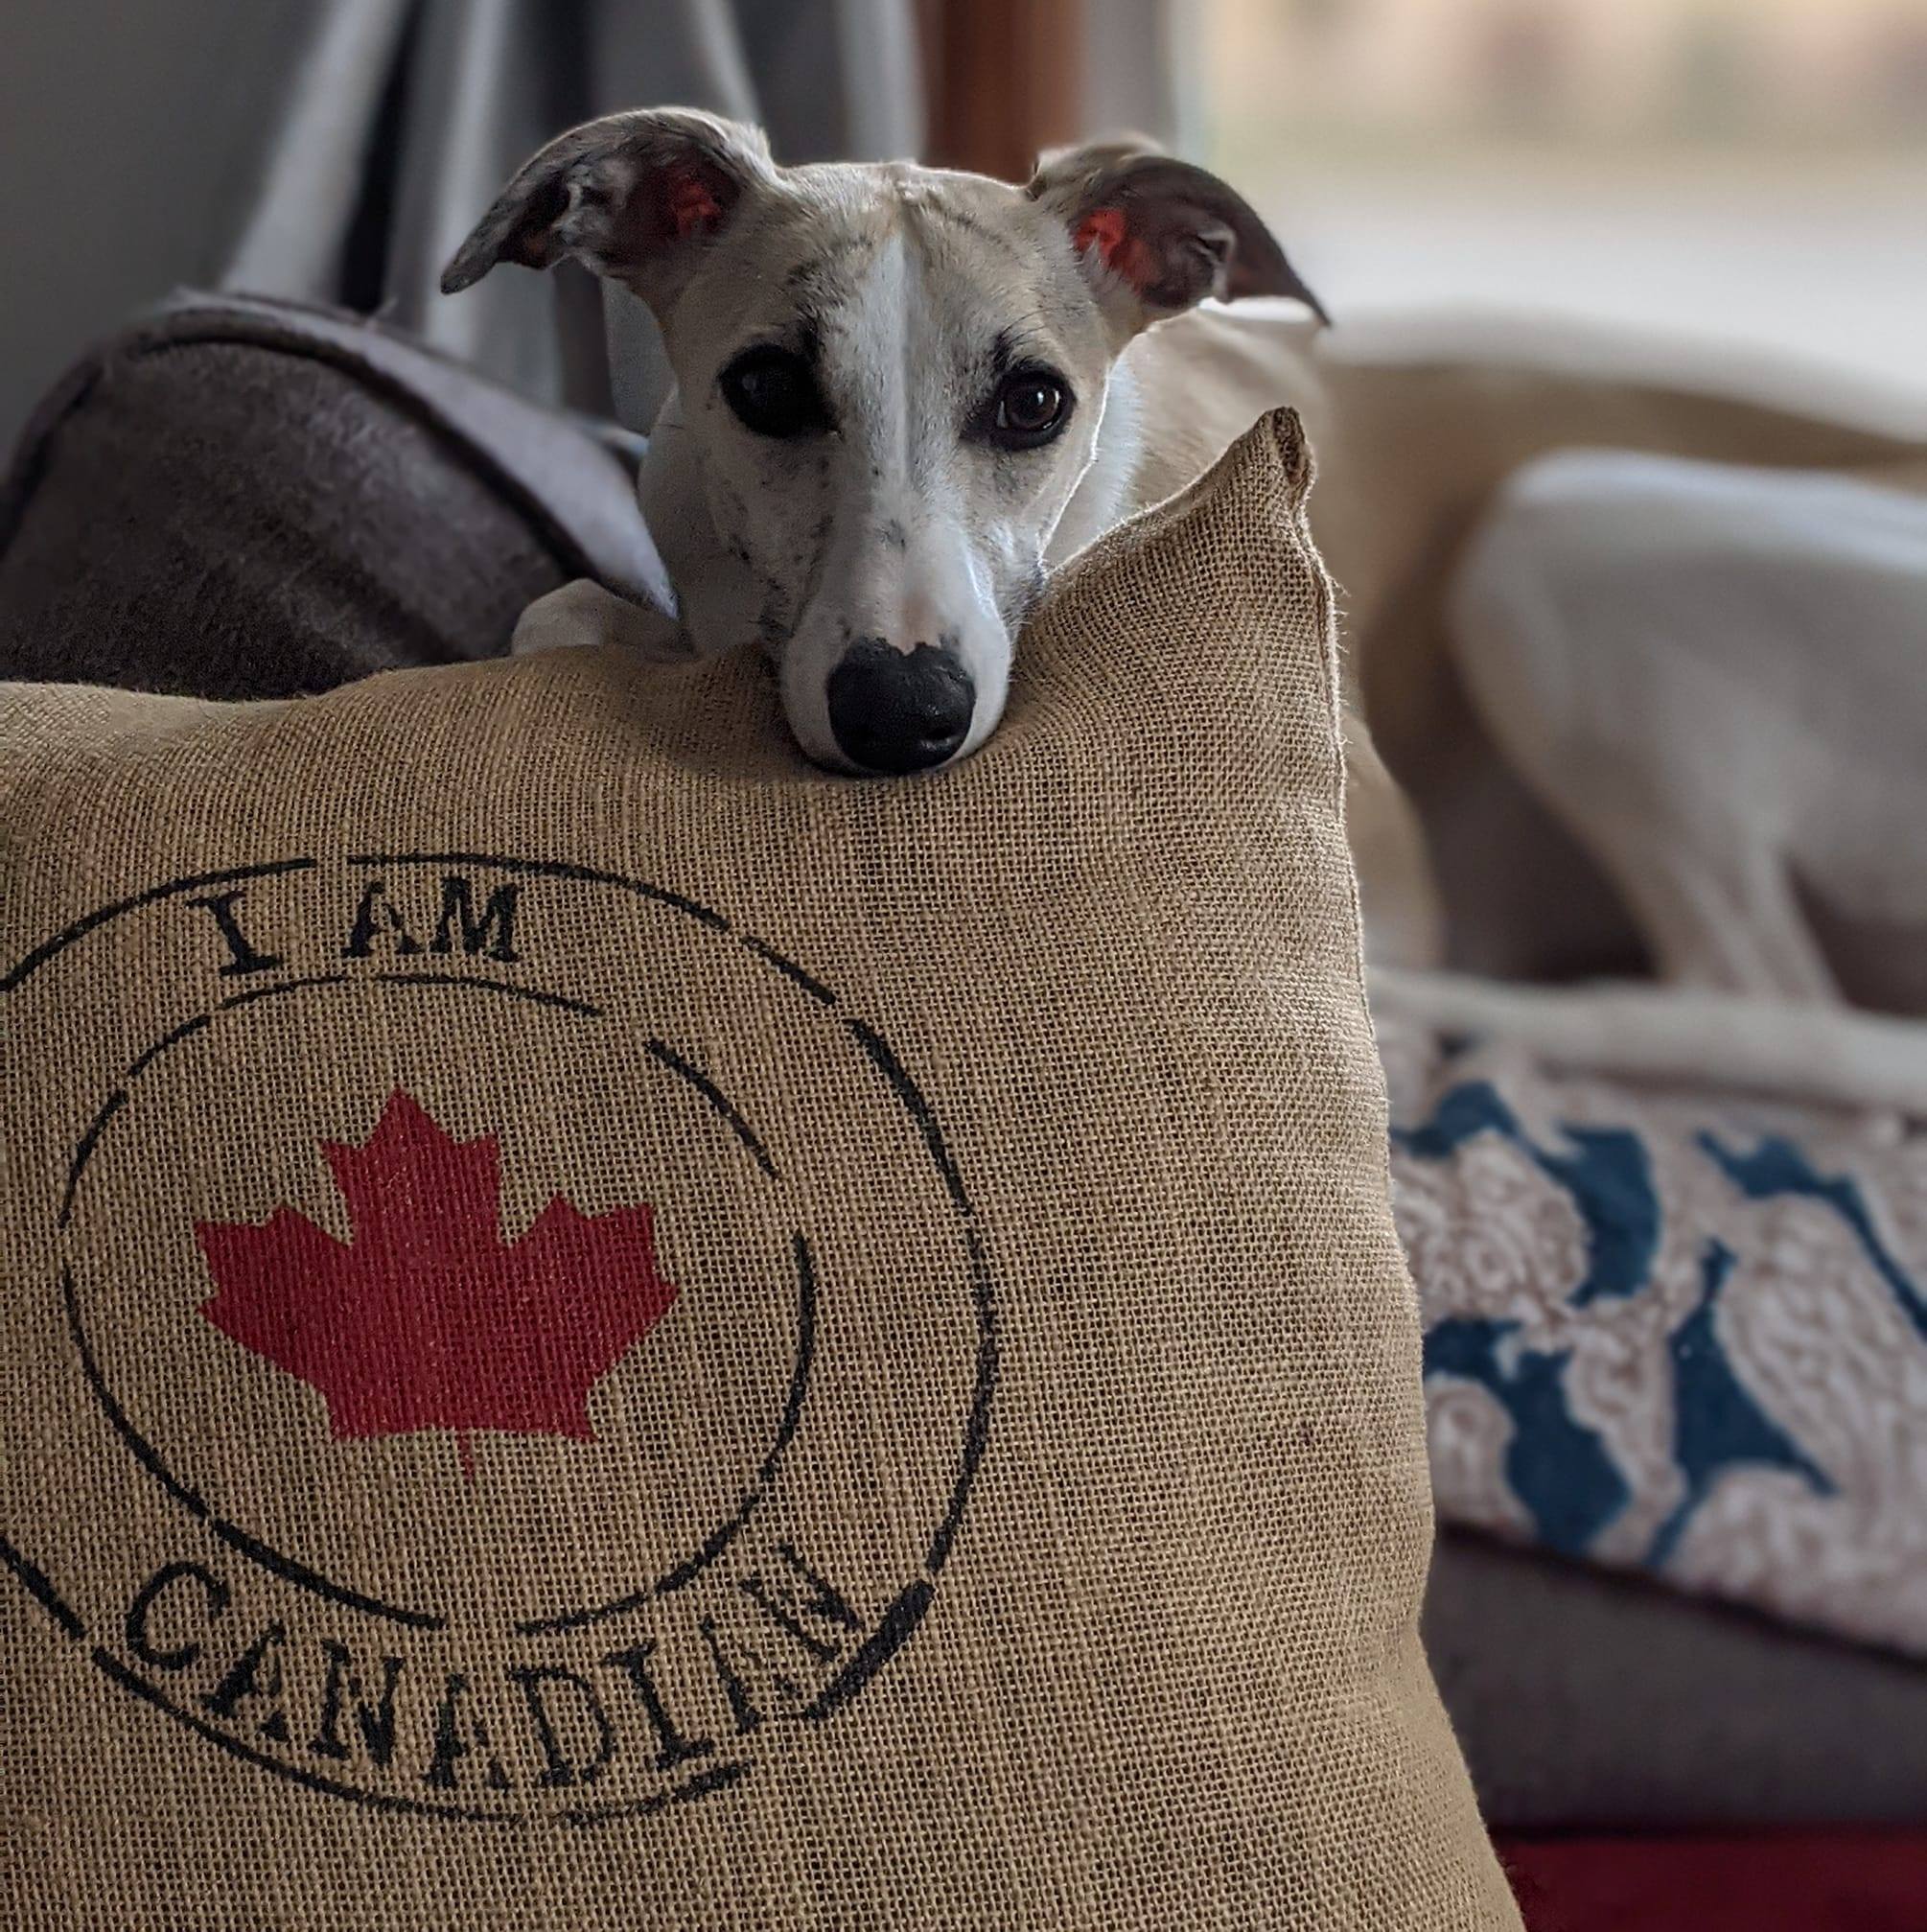 A Whippet puppy on a canada pillow